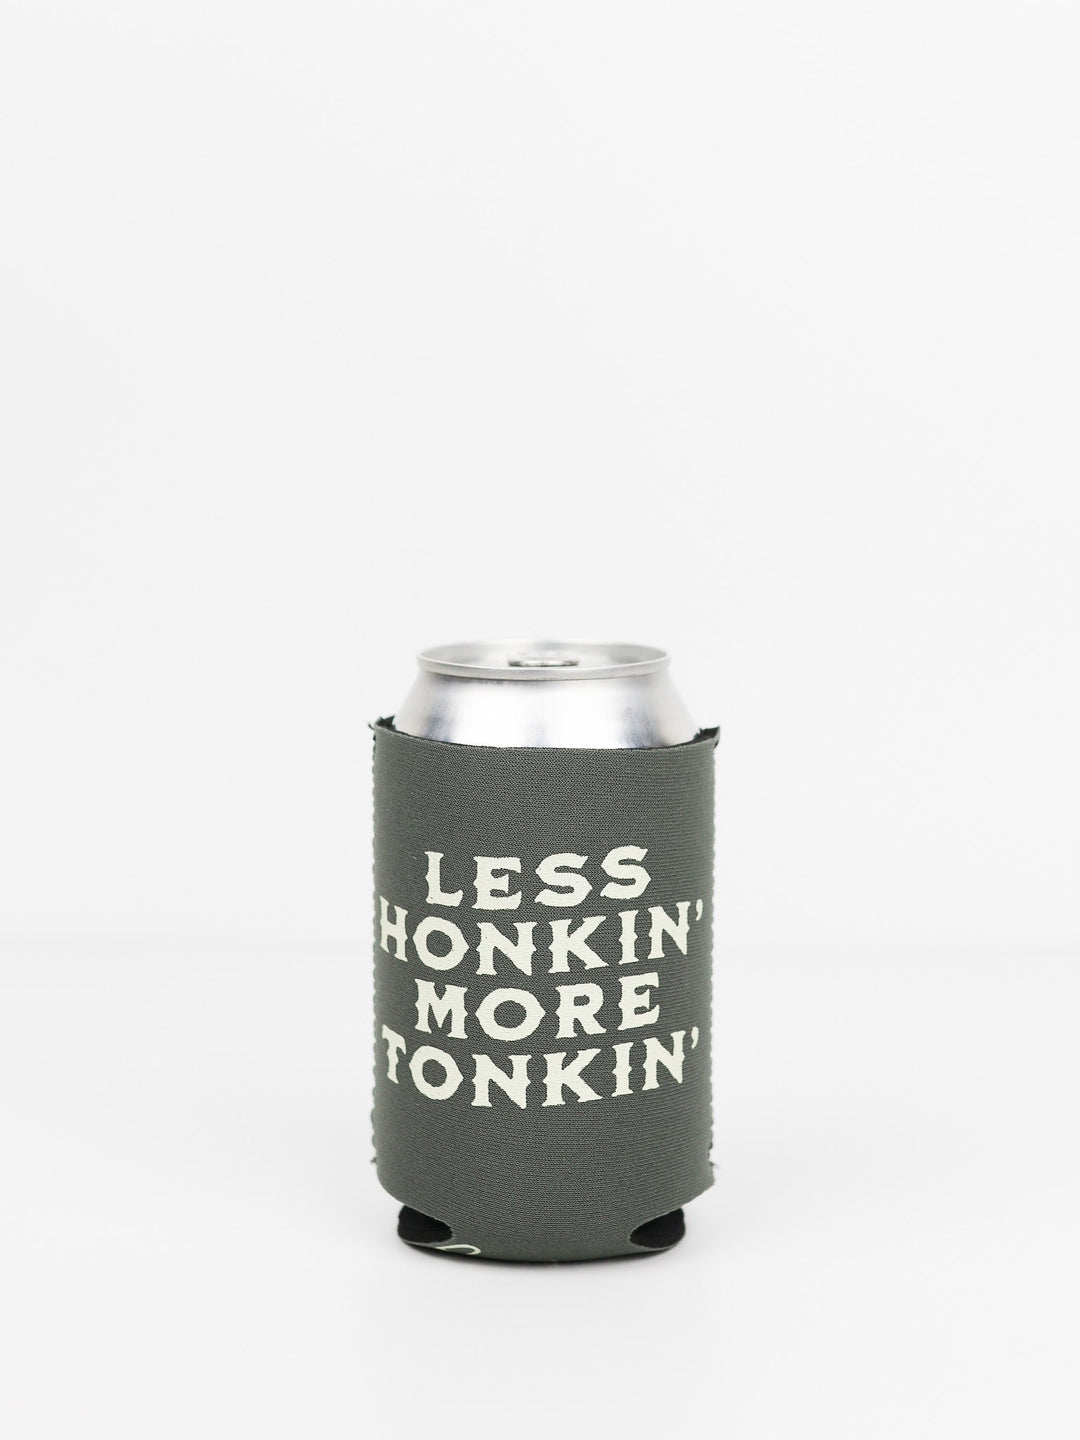 Less Honkin' More Tonkin' Coozie - Heyday